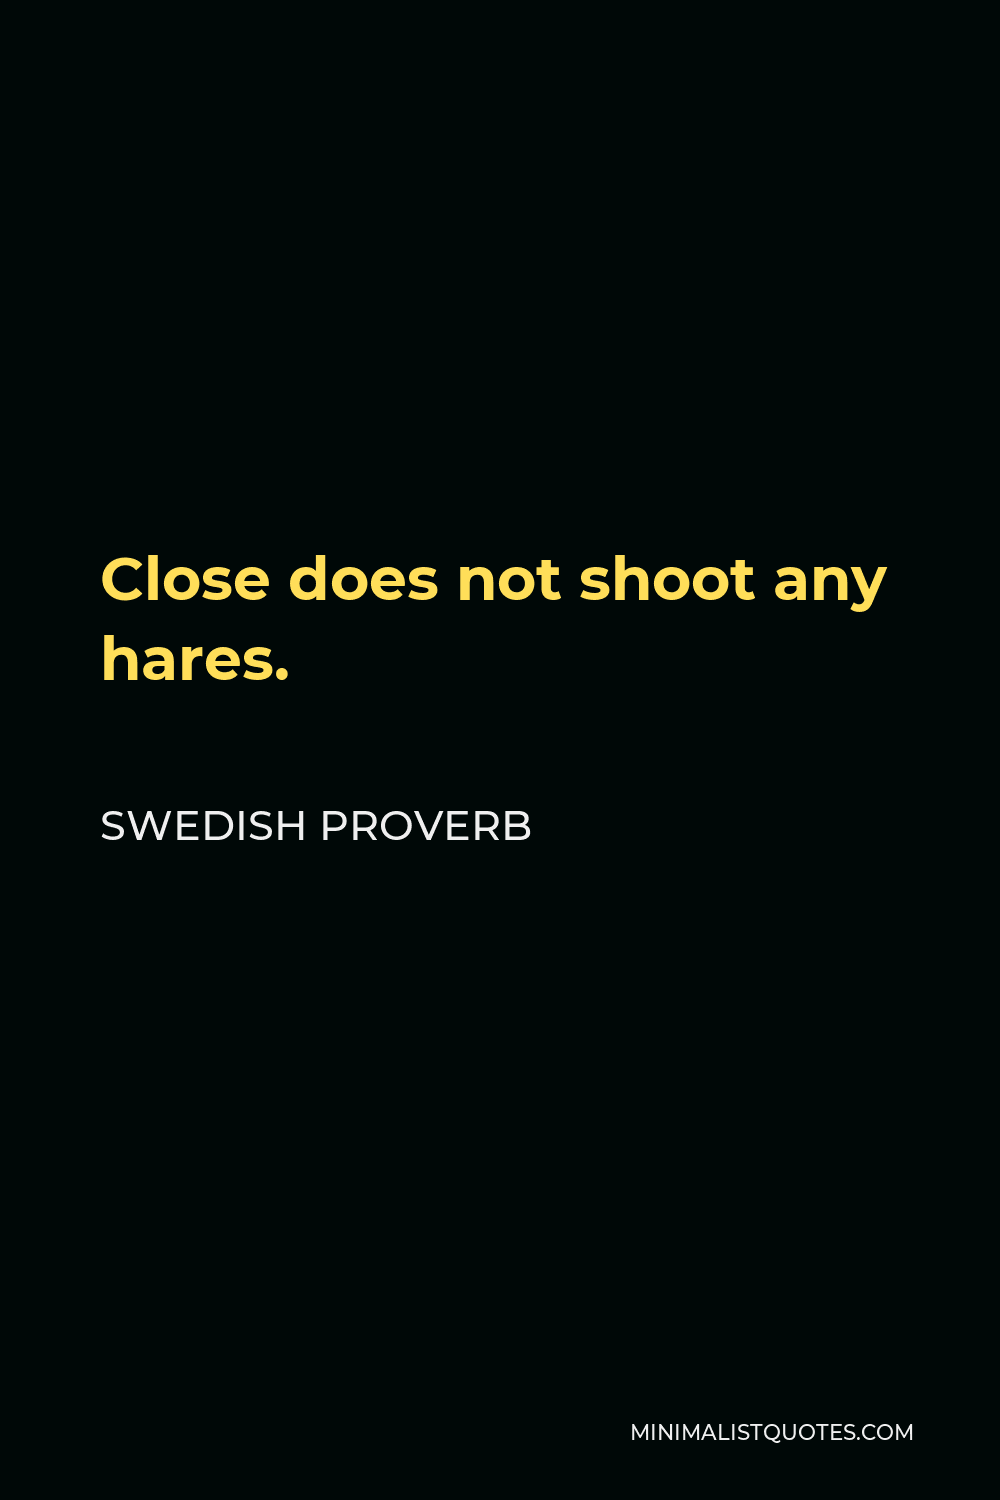 Swedish Proverb Quote - Close does not shoot any hares.